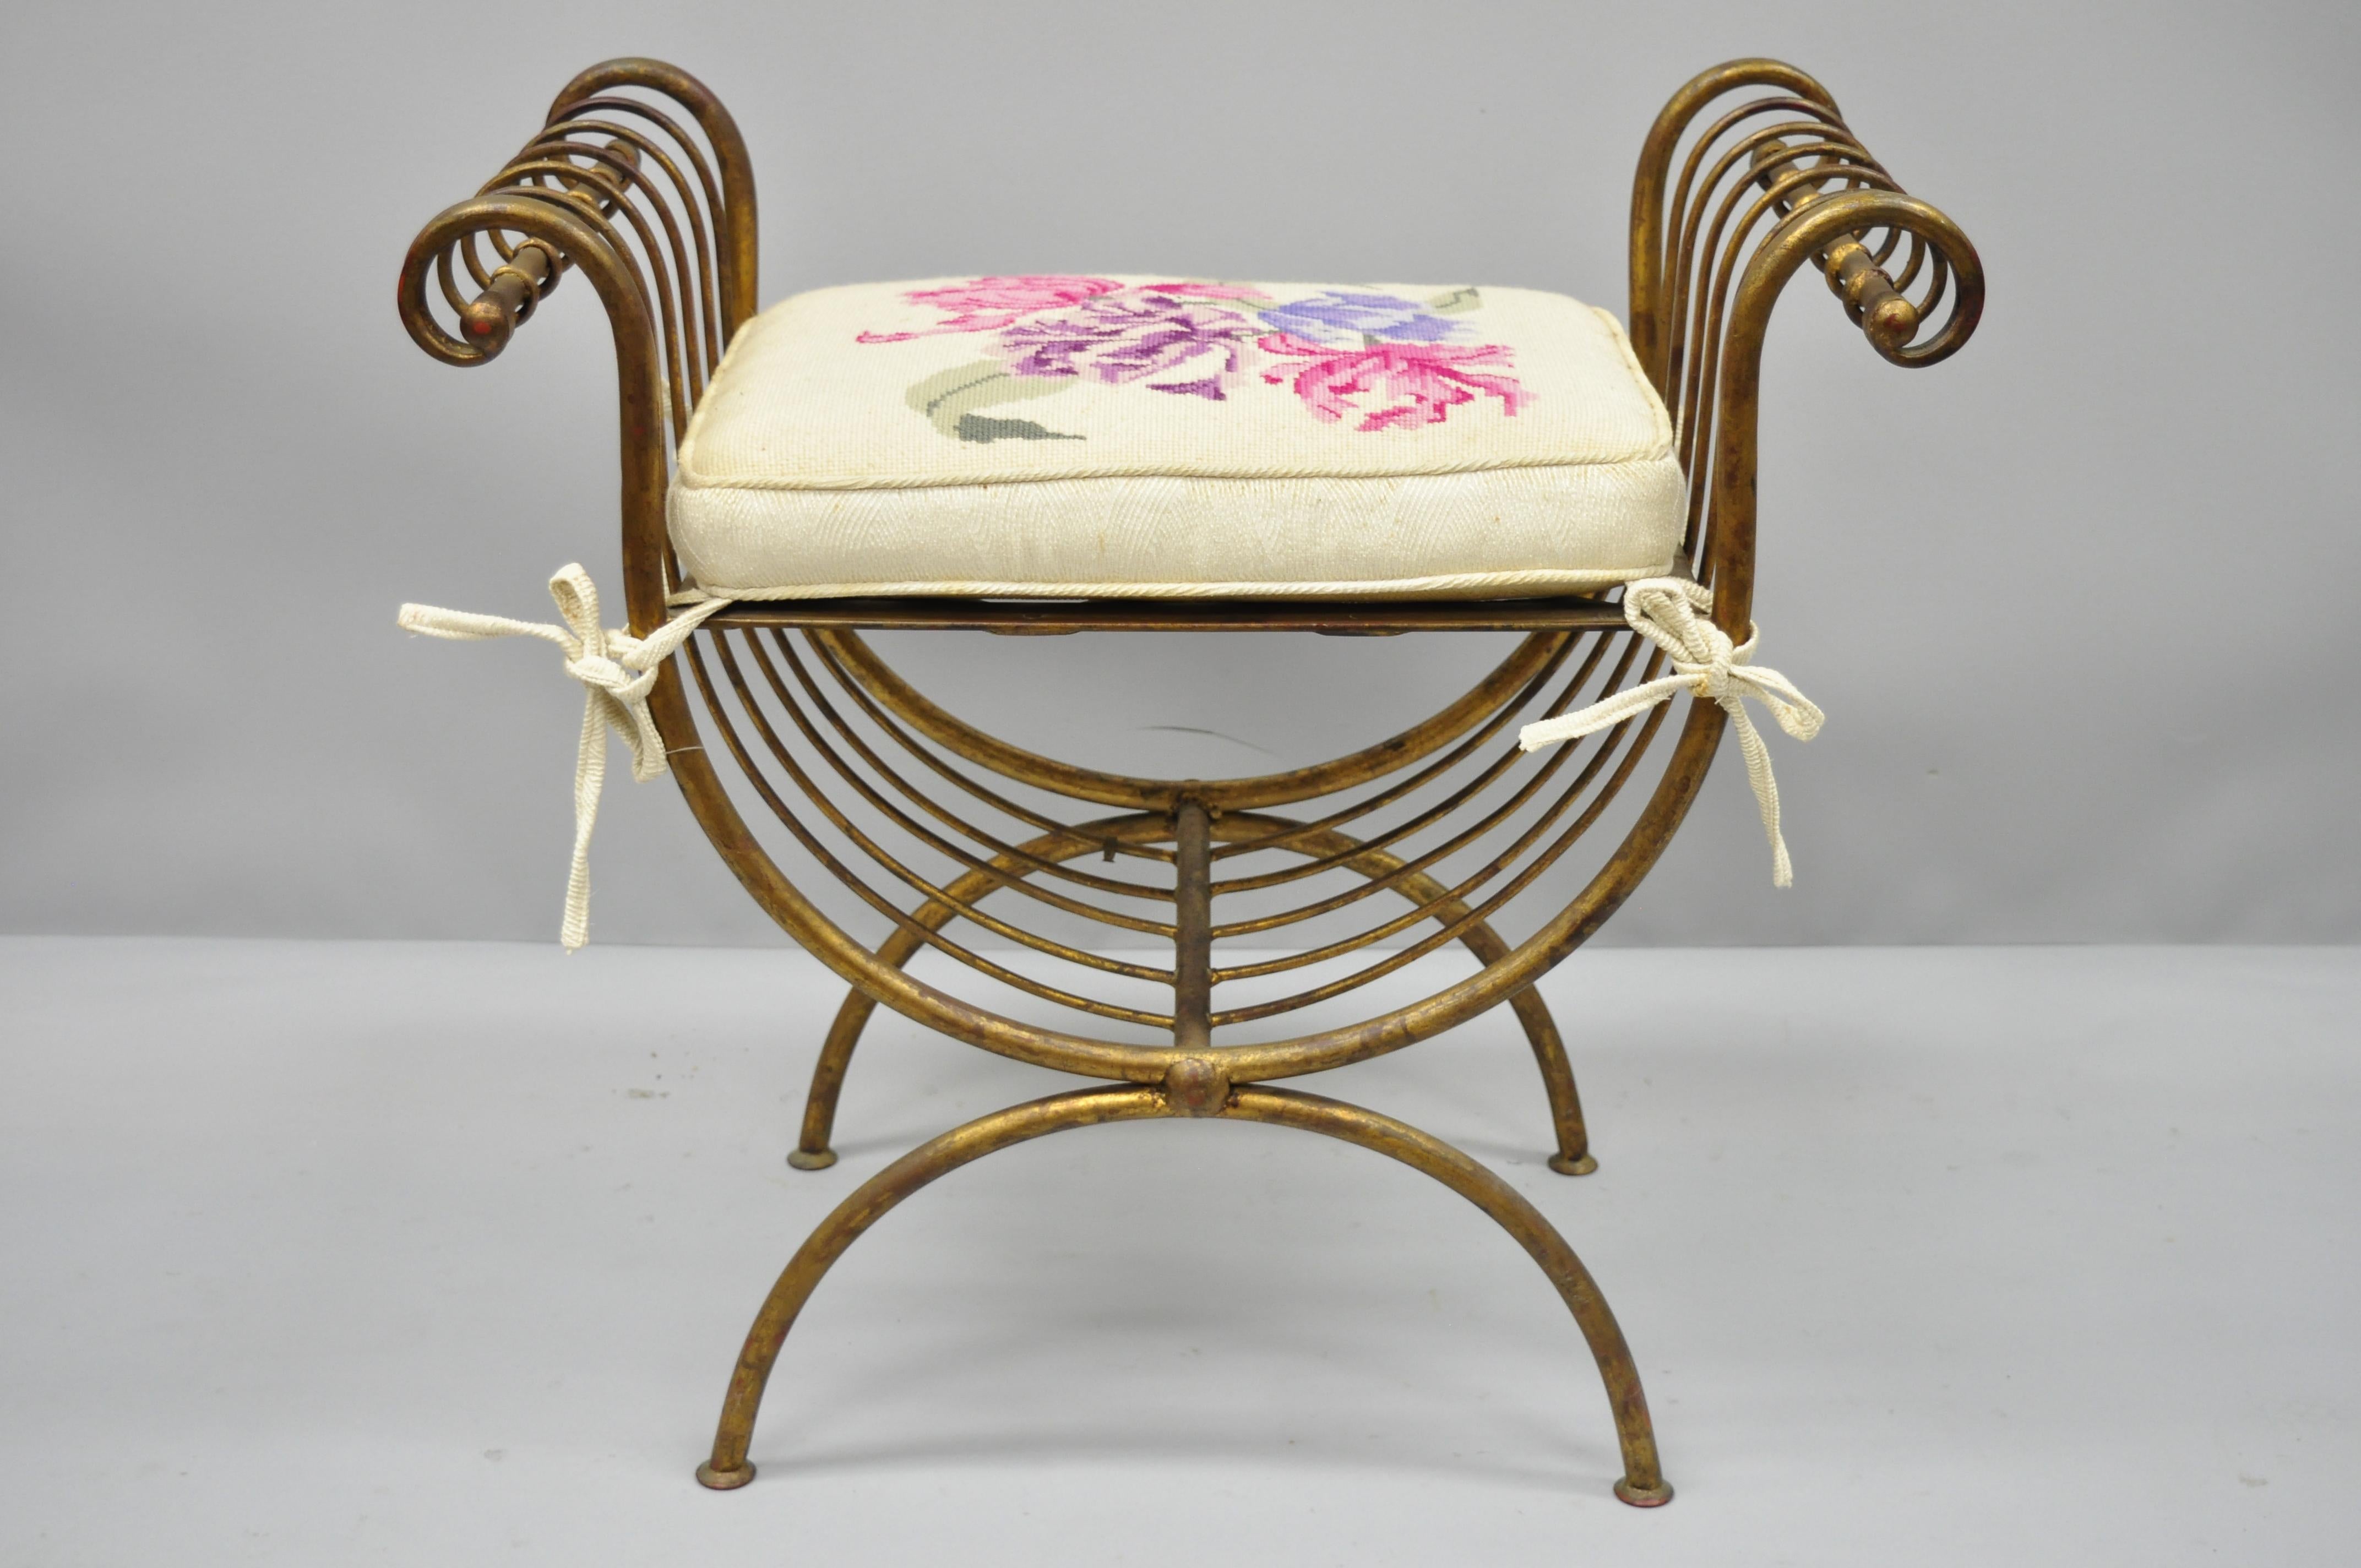 Vintage Italian Hollywood Regency iron gold gilt curule vanity bench seat chair. Item features gold gilt, curule frame, loose cushion, iron construction, distressed finish, and great style and form. Mid-20th century. Measurements: 24